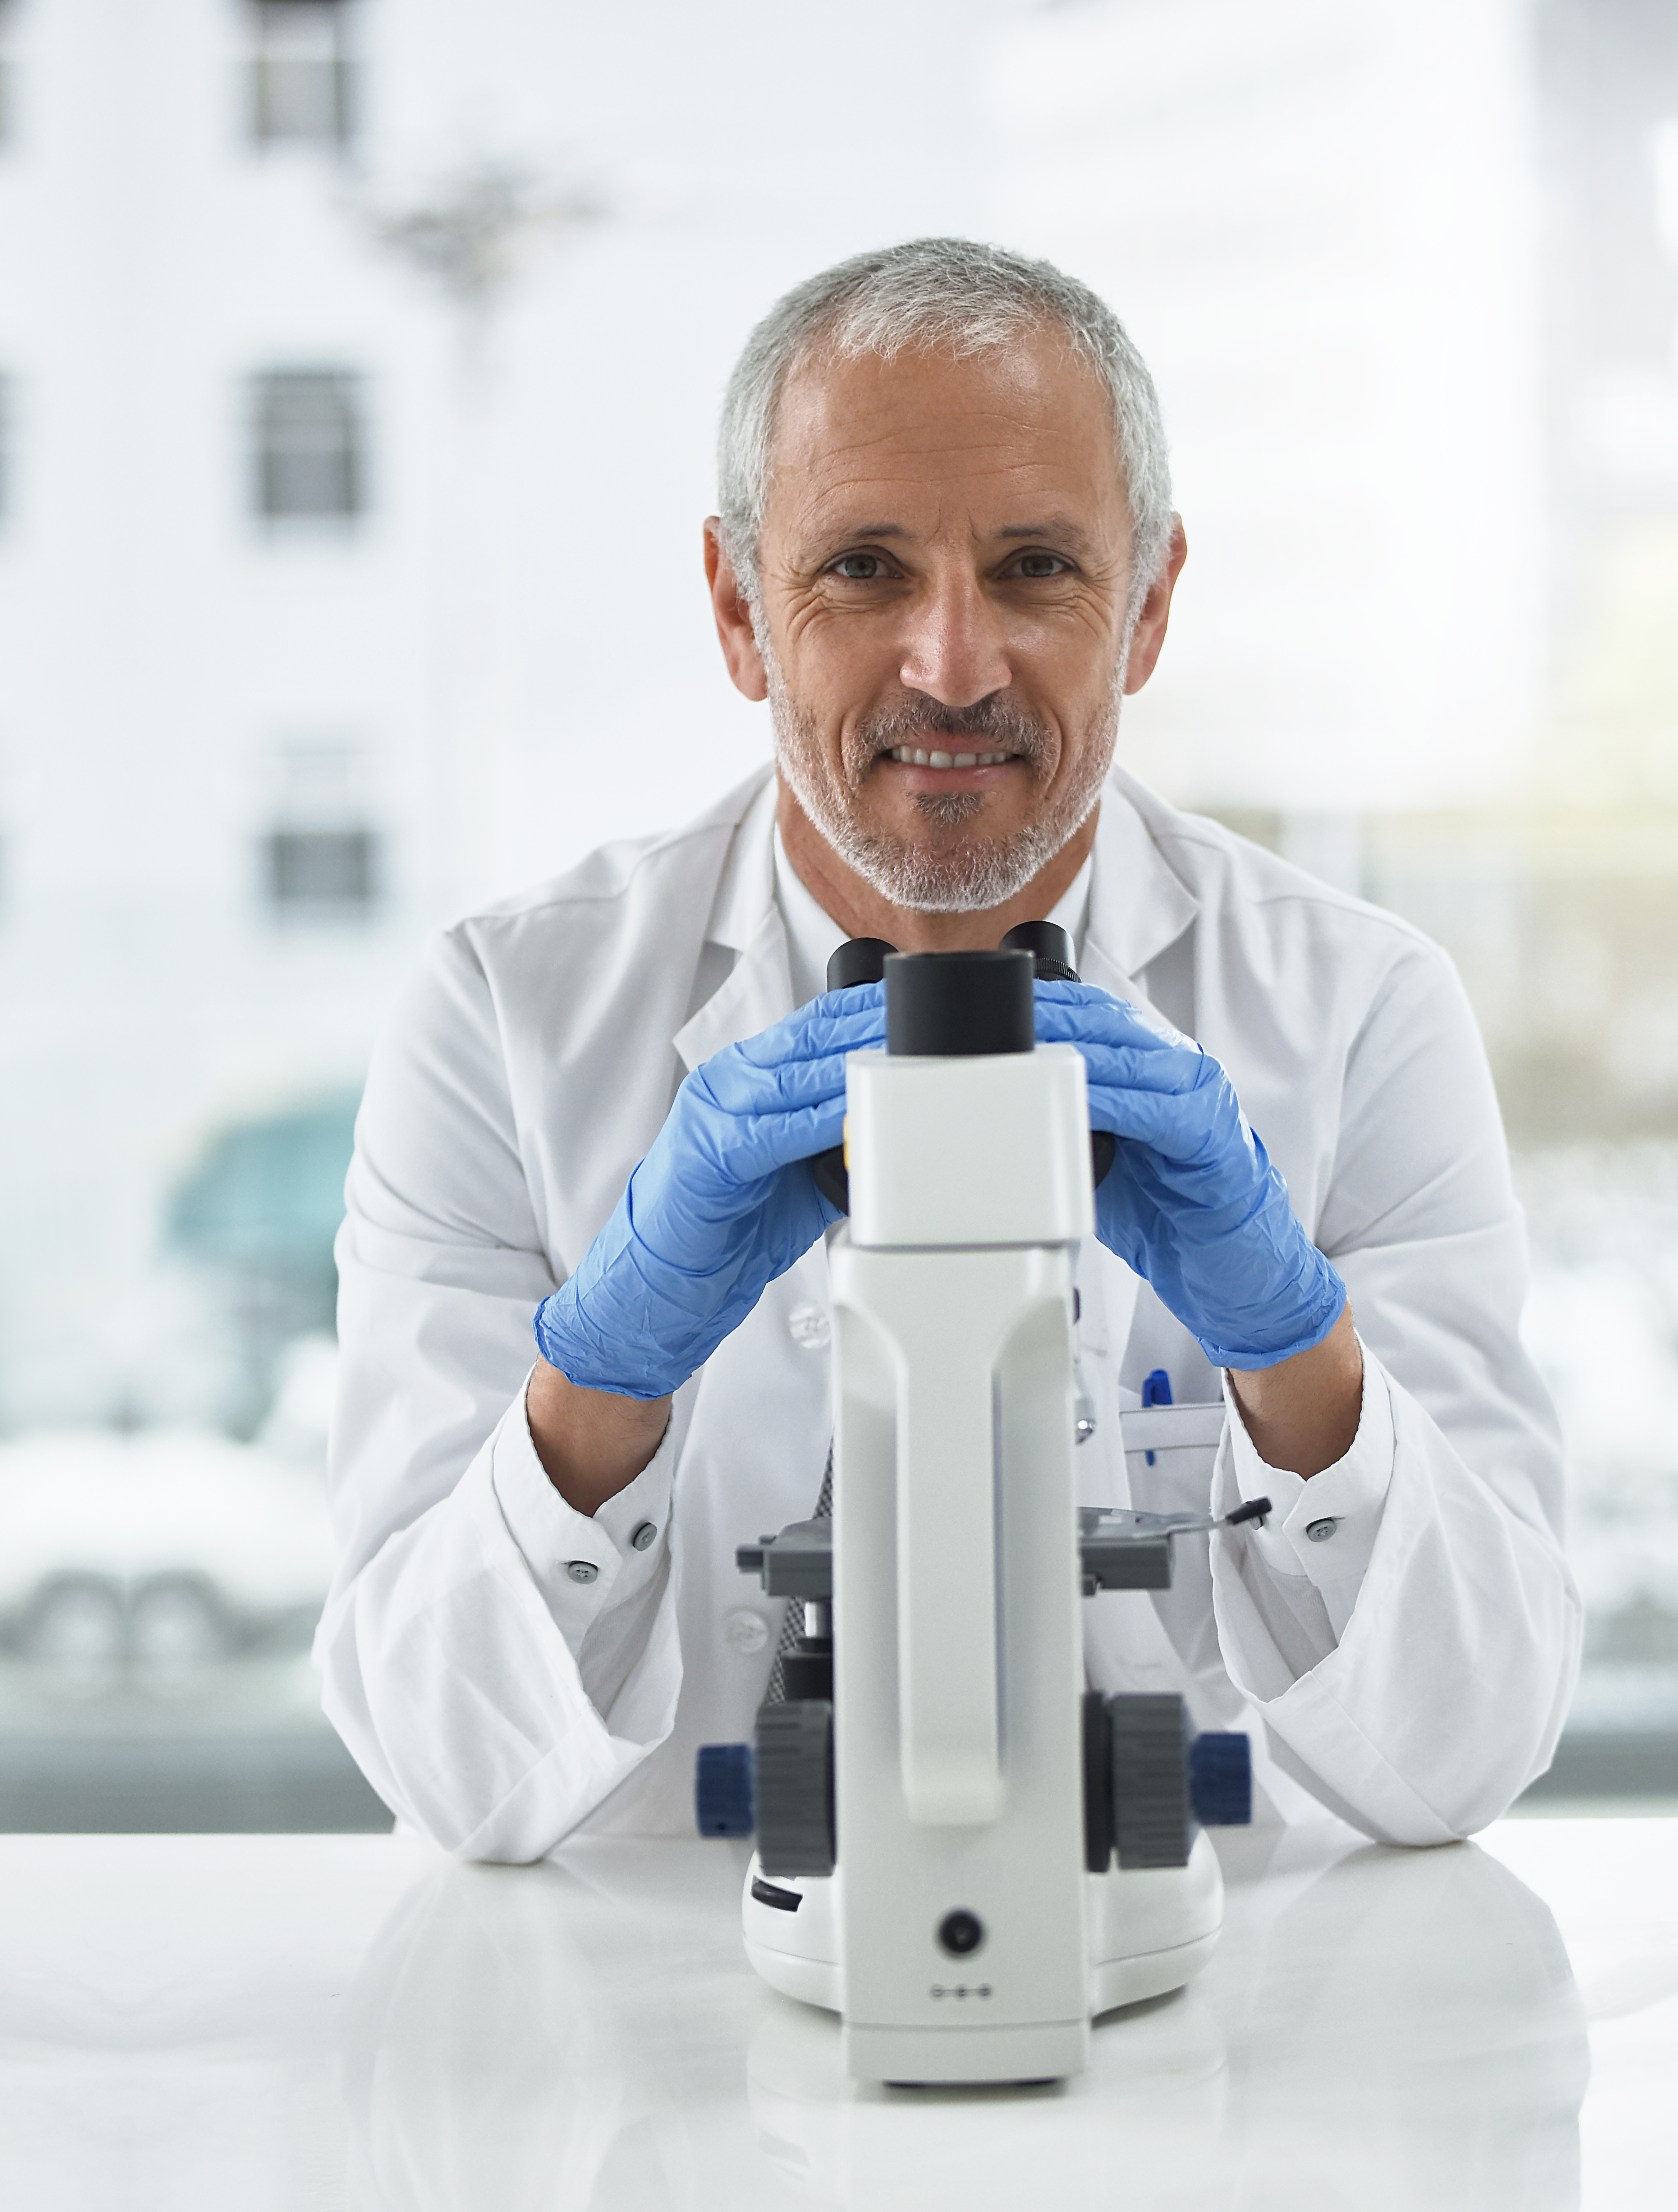 Portrait of a researcher at work on a microscope in a lab